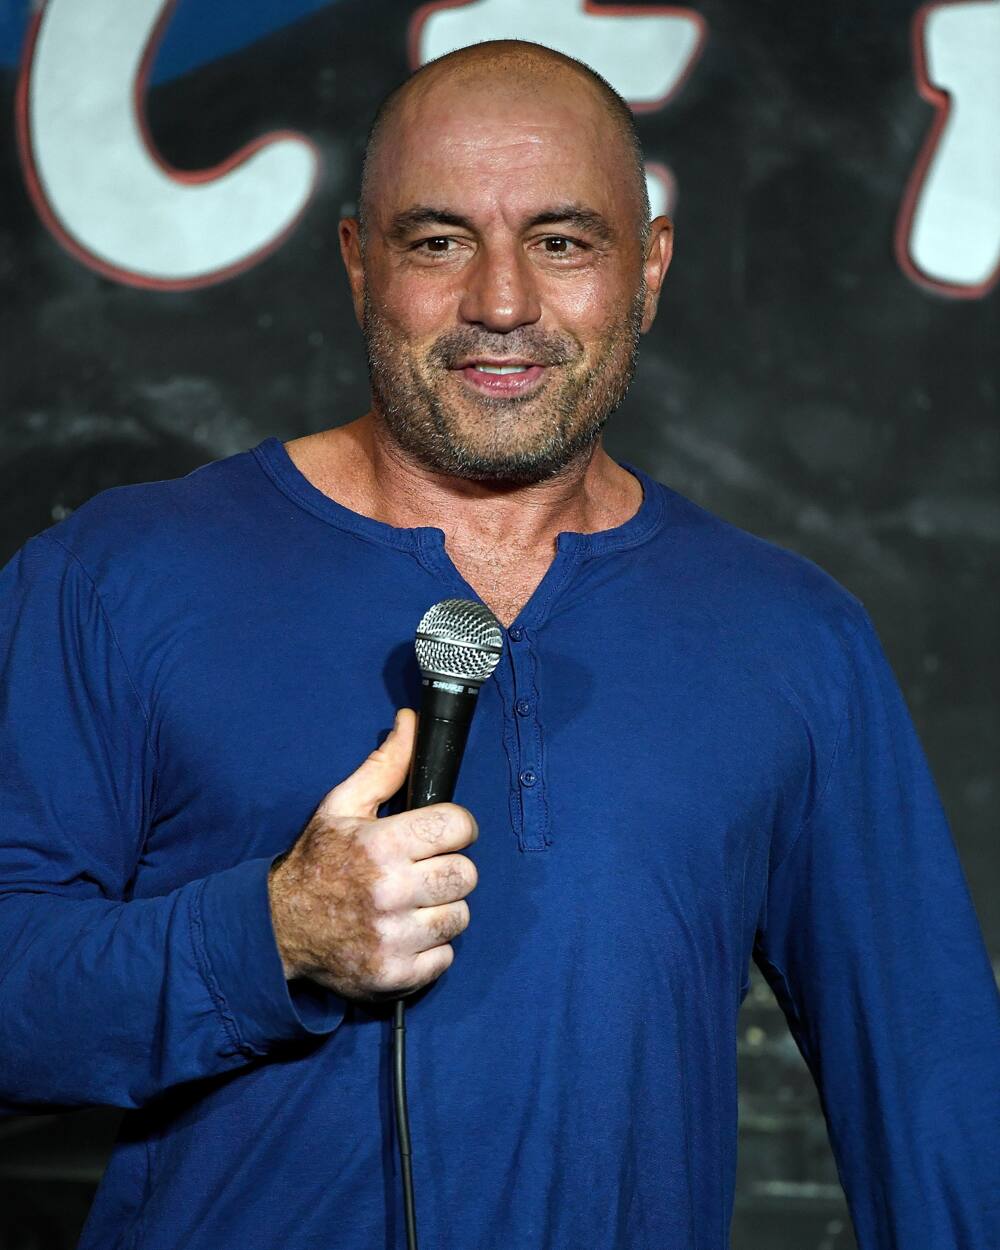 JRE podcast host